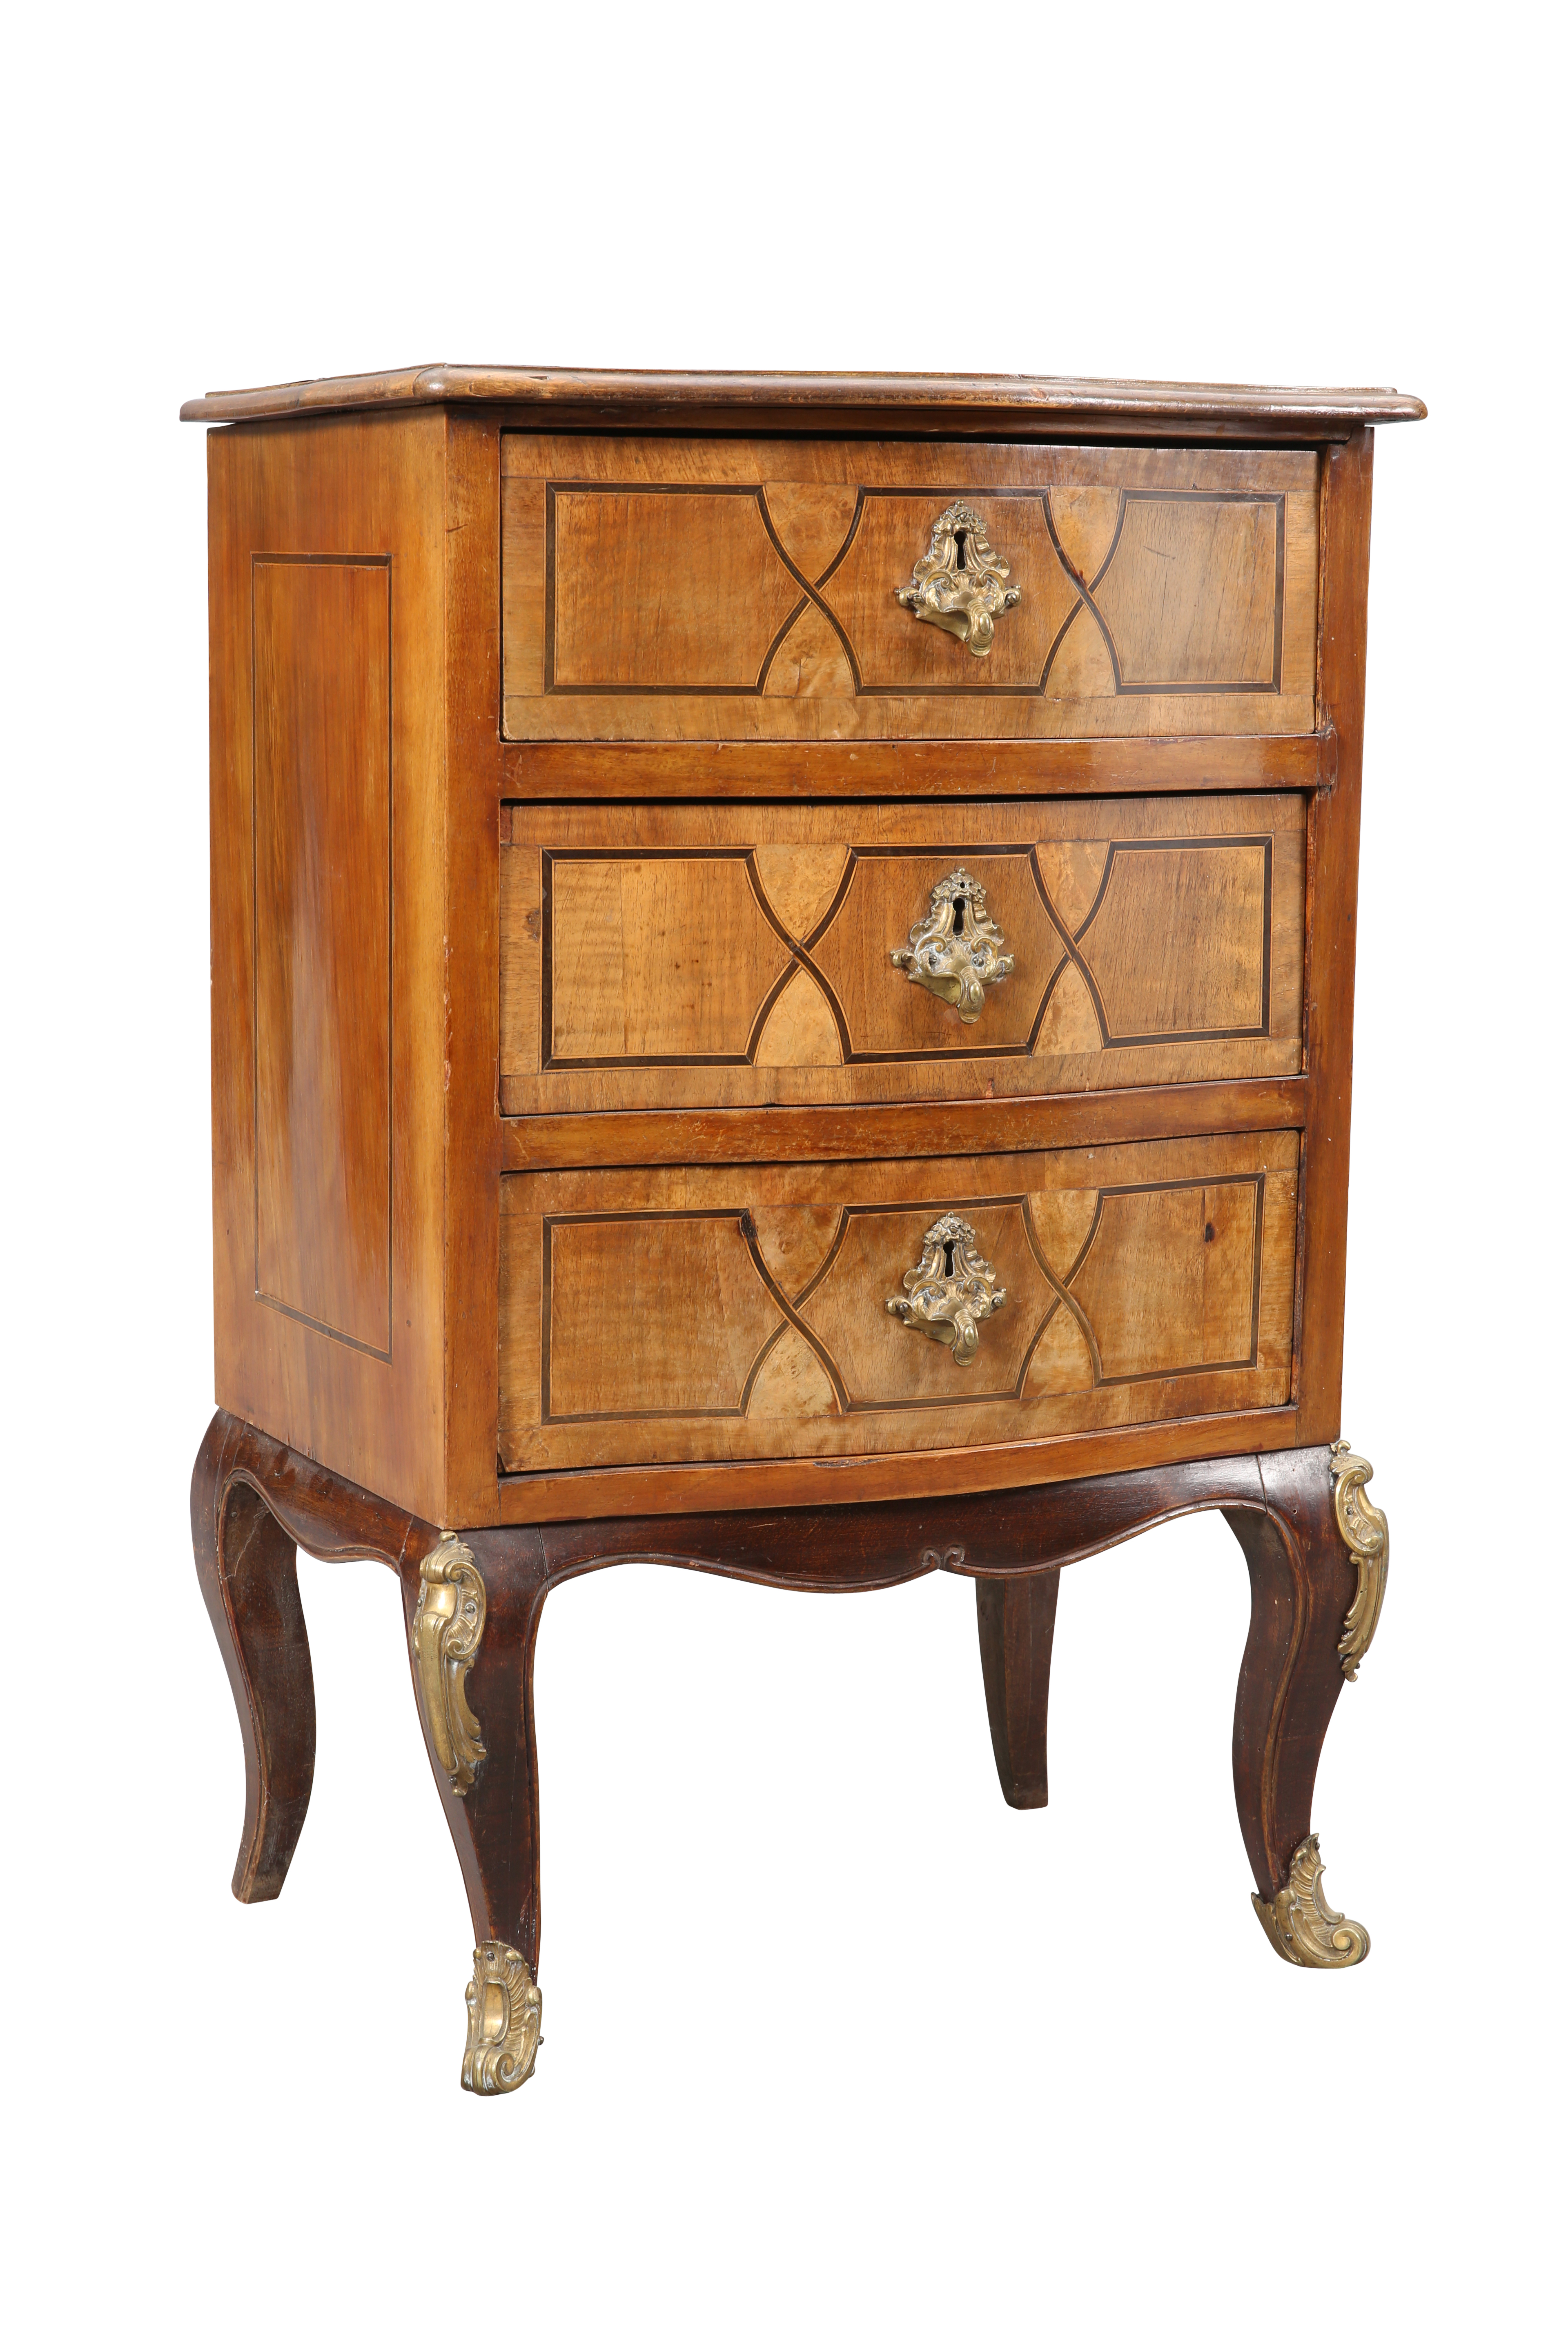 A CONTINENTAL INLAID WALNUT CHEST OF DRAWERS